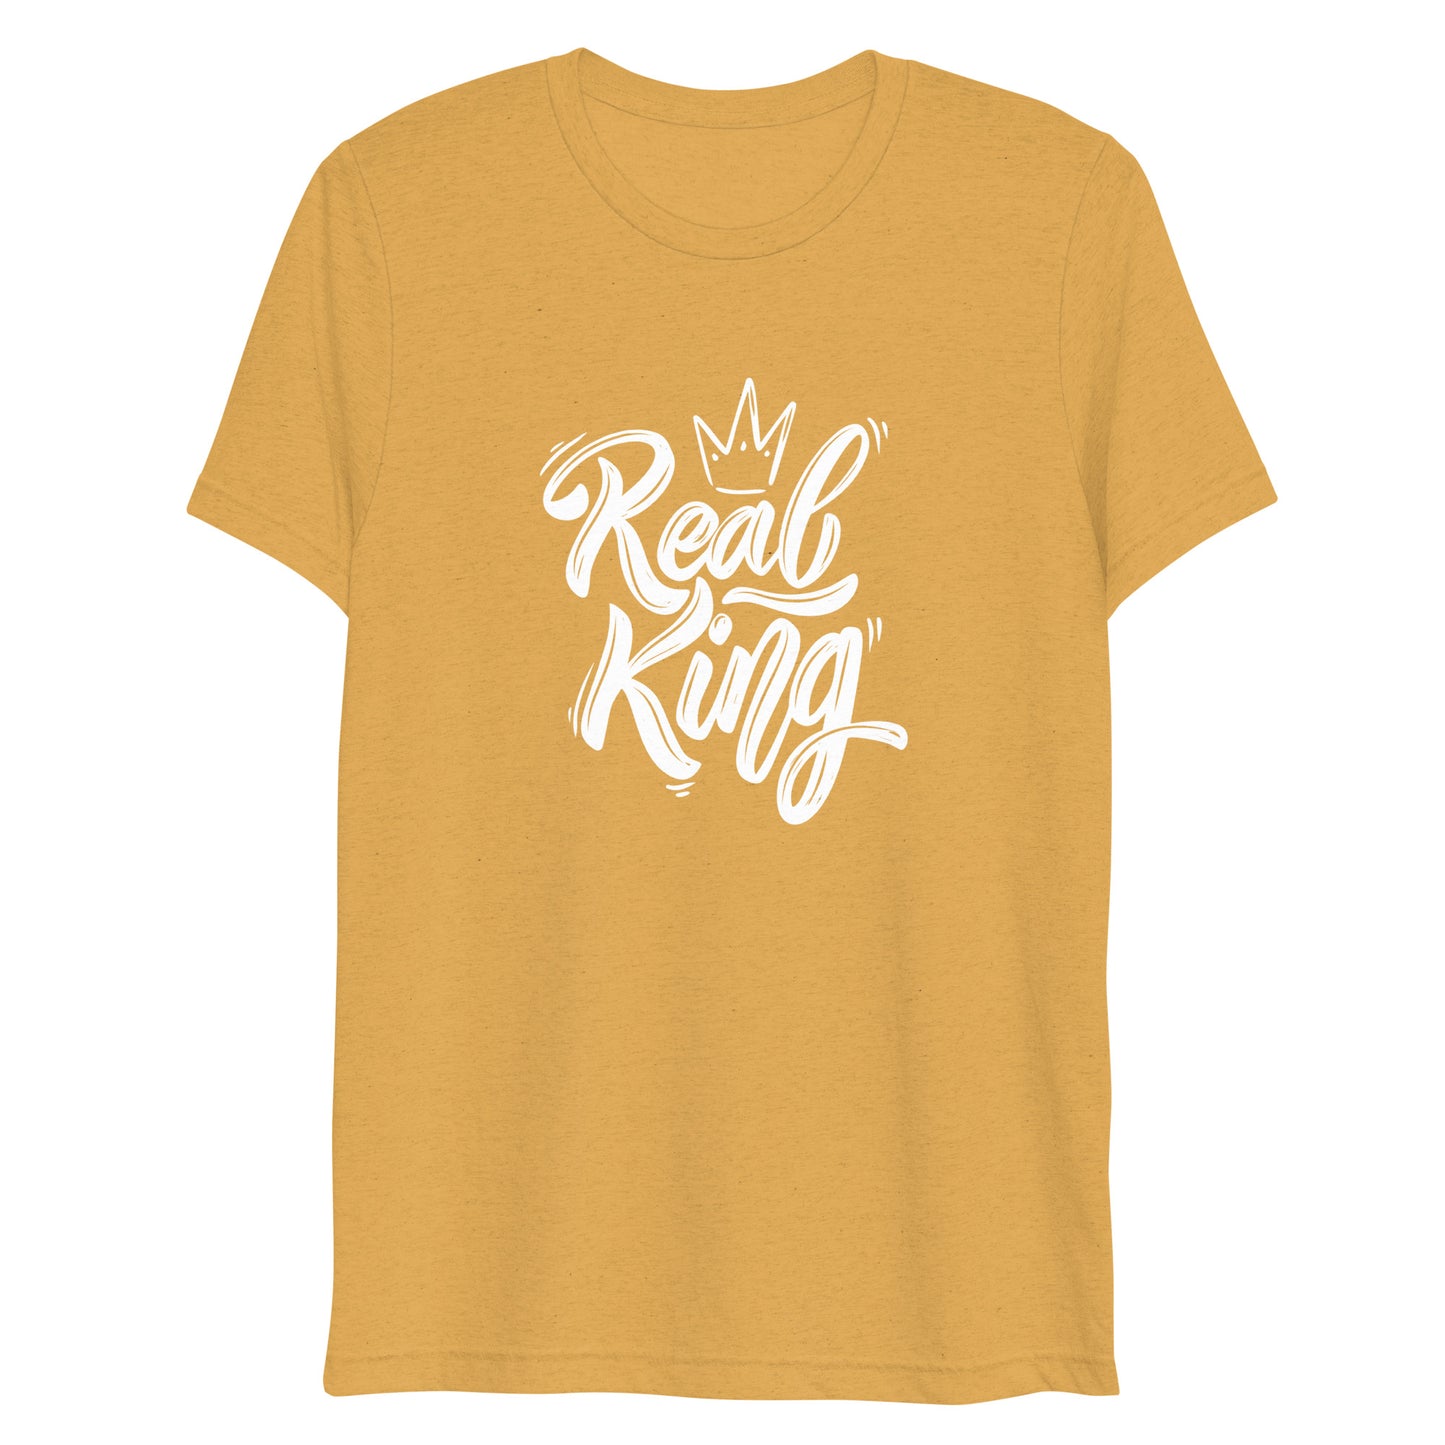 Real King Men's T Shirt, Dad Gift, Father's Day, King, Father, Gift for Him, Gift, King Shirt, Birthday Gift